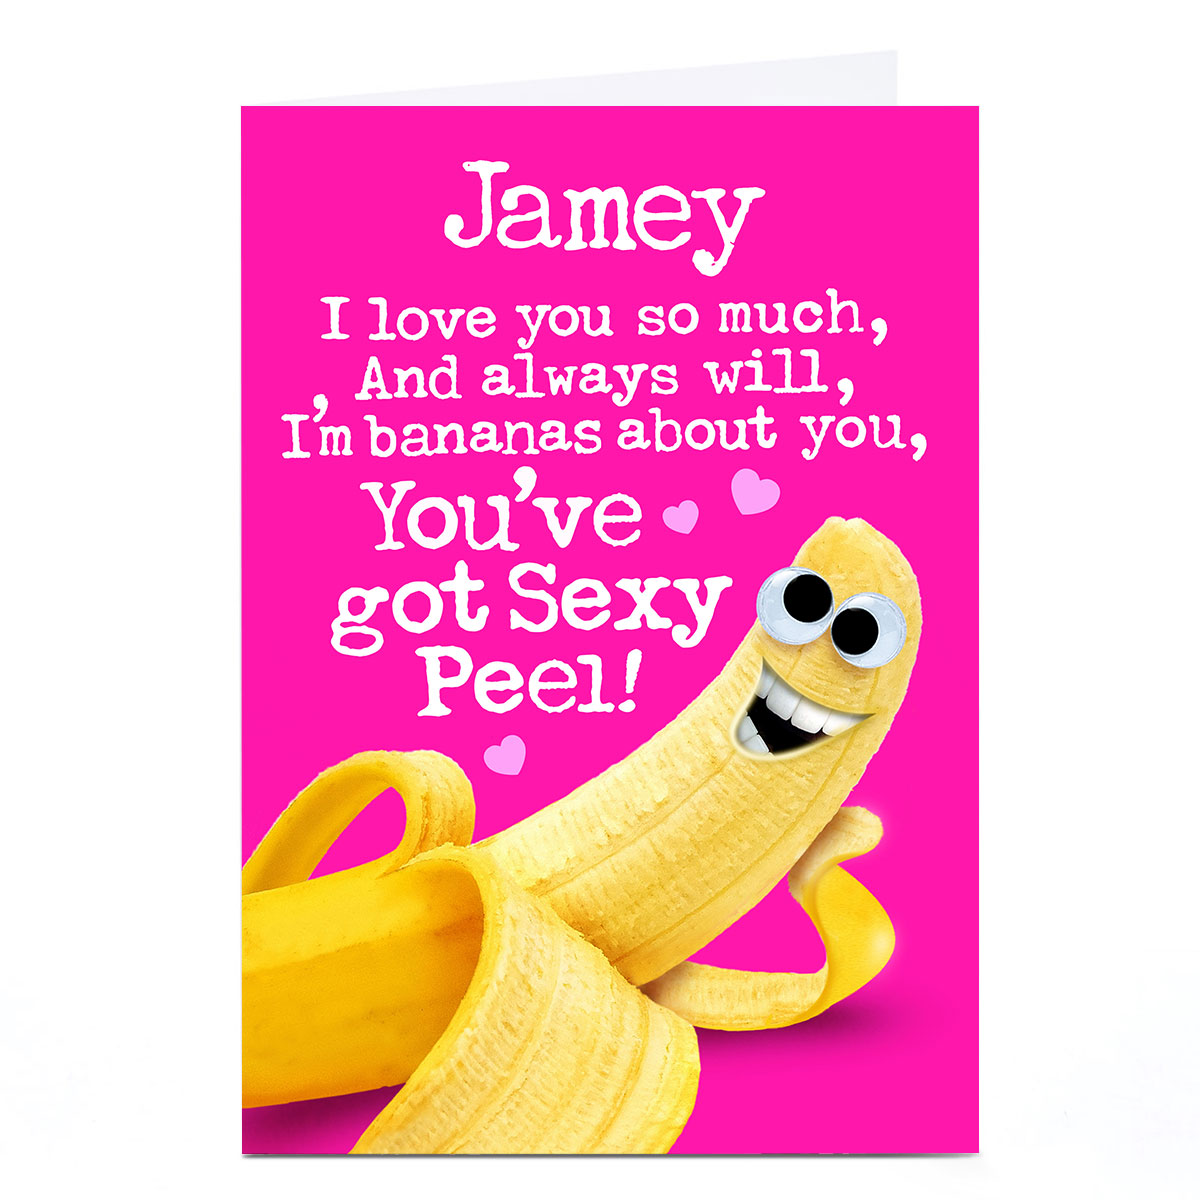 Personalised PG Quips Valentine's Day Card - You've Got Sexy Peel